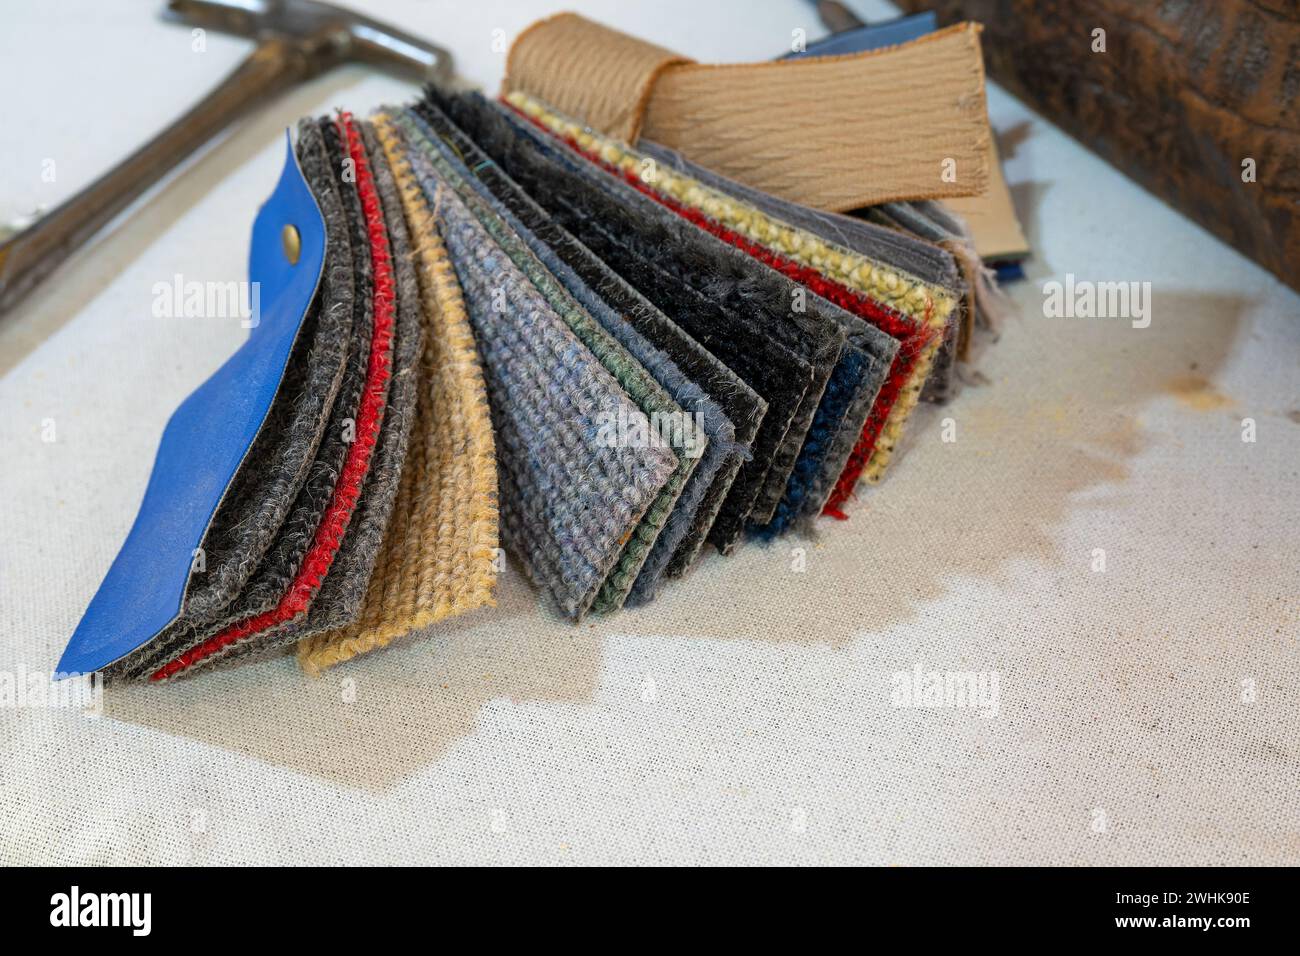 Carpet sample pieces in various colors made of robust plant fibers for natural and eco-friendly interior design, copy space, sel Stock Photo